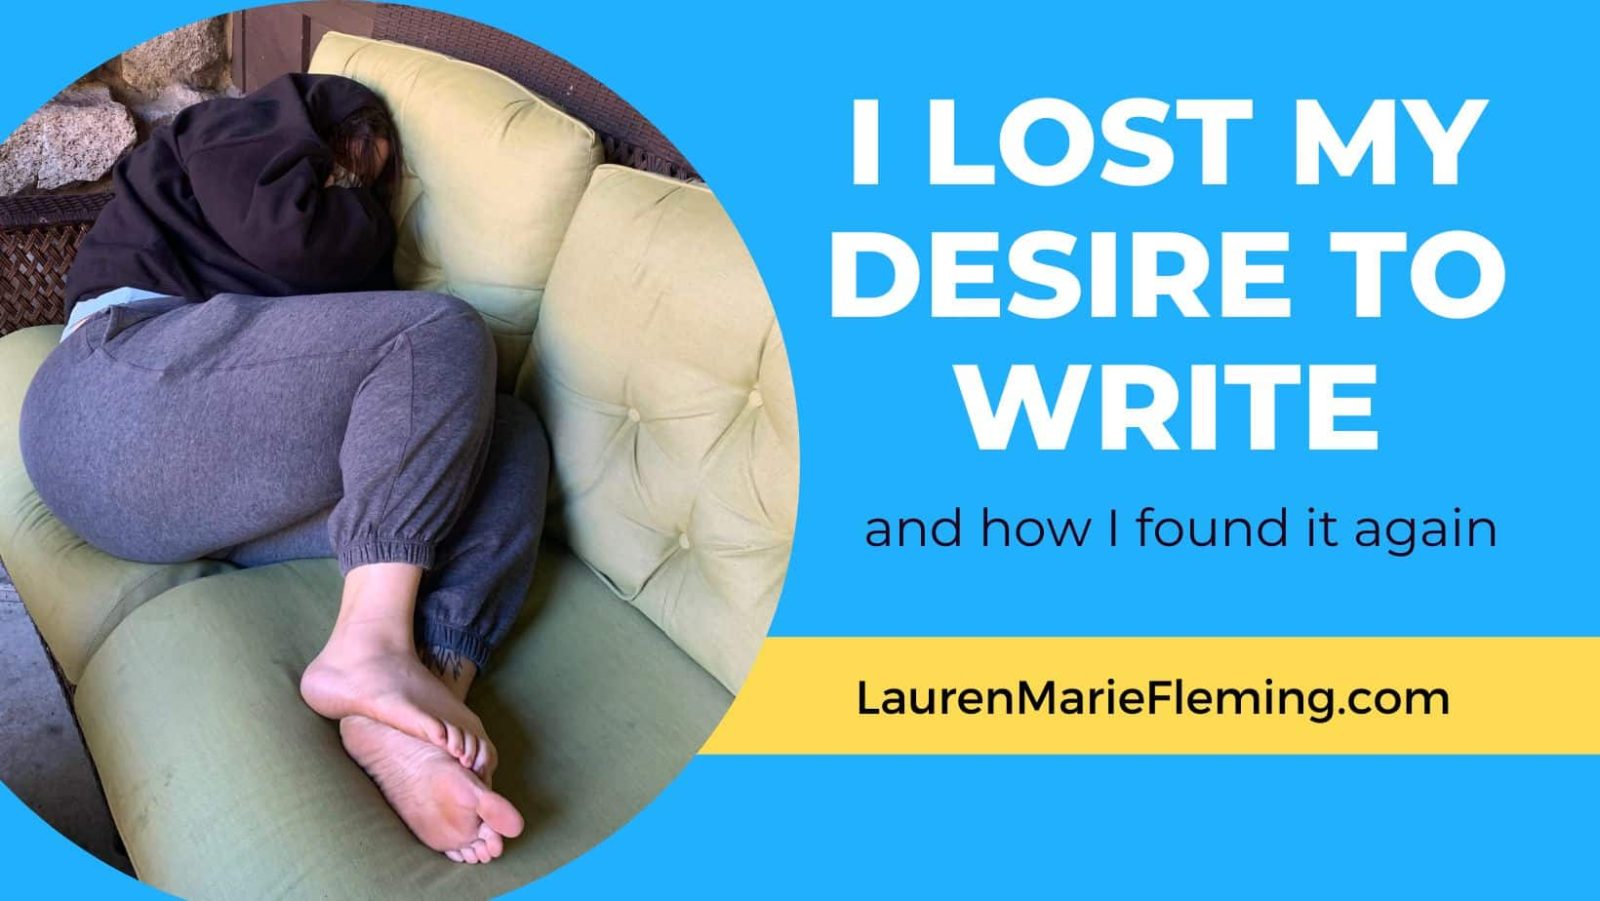 I lost my desire to write. Here’s how I got it back again.